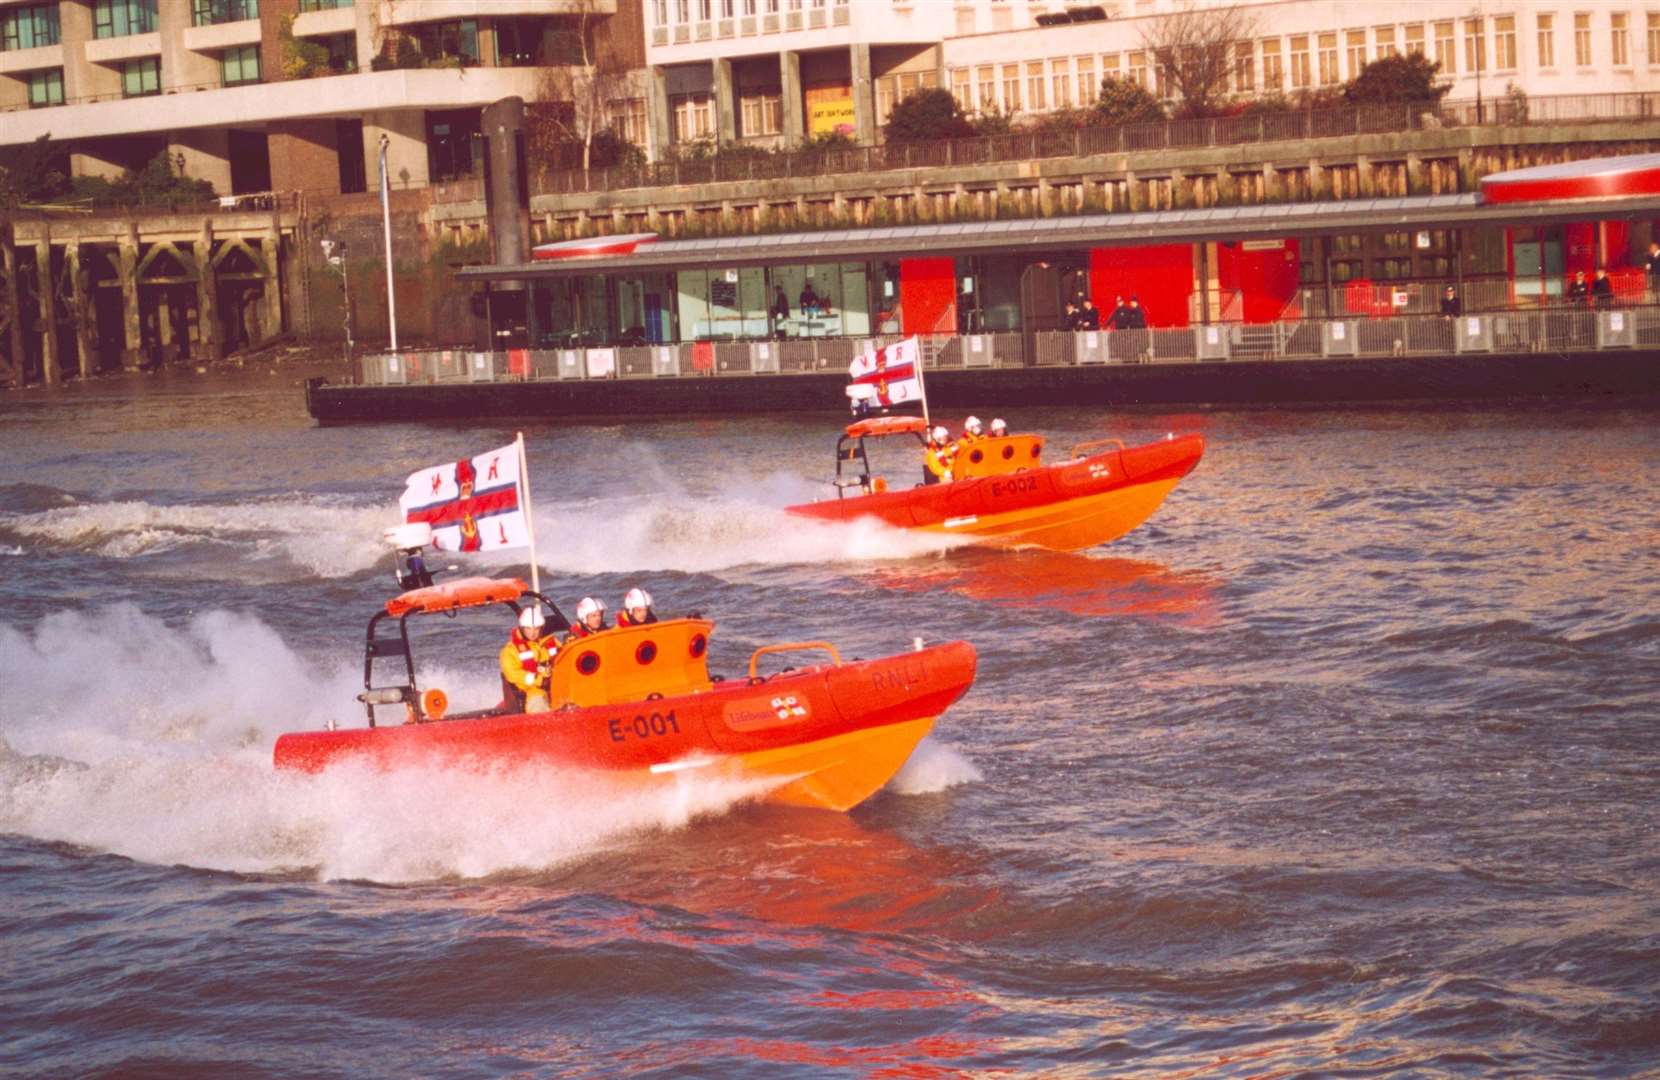 Lifeboats on the River Thames became operational in January 2002 and pictured here are E class fast rescue boats including from the station at Gravesend moving towards Tower Pier lifeboat station. Image: RNLI.